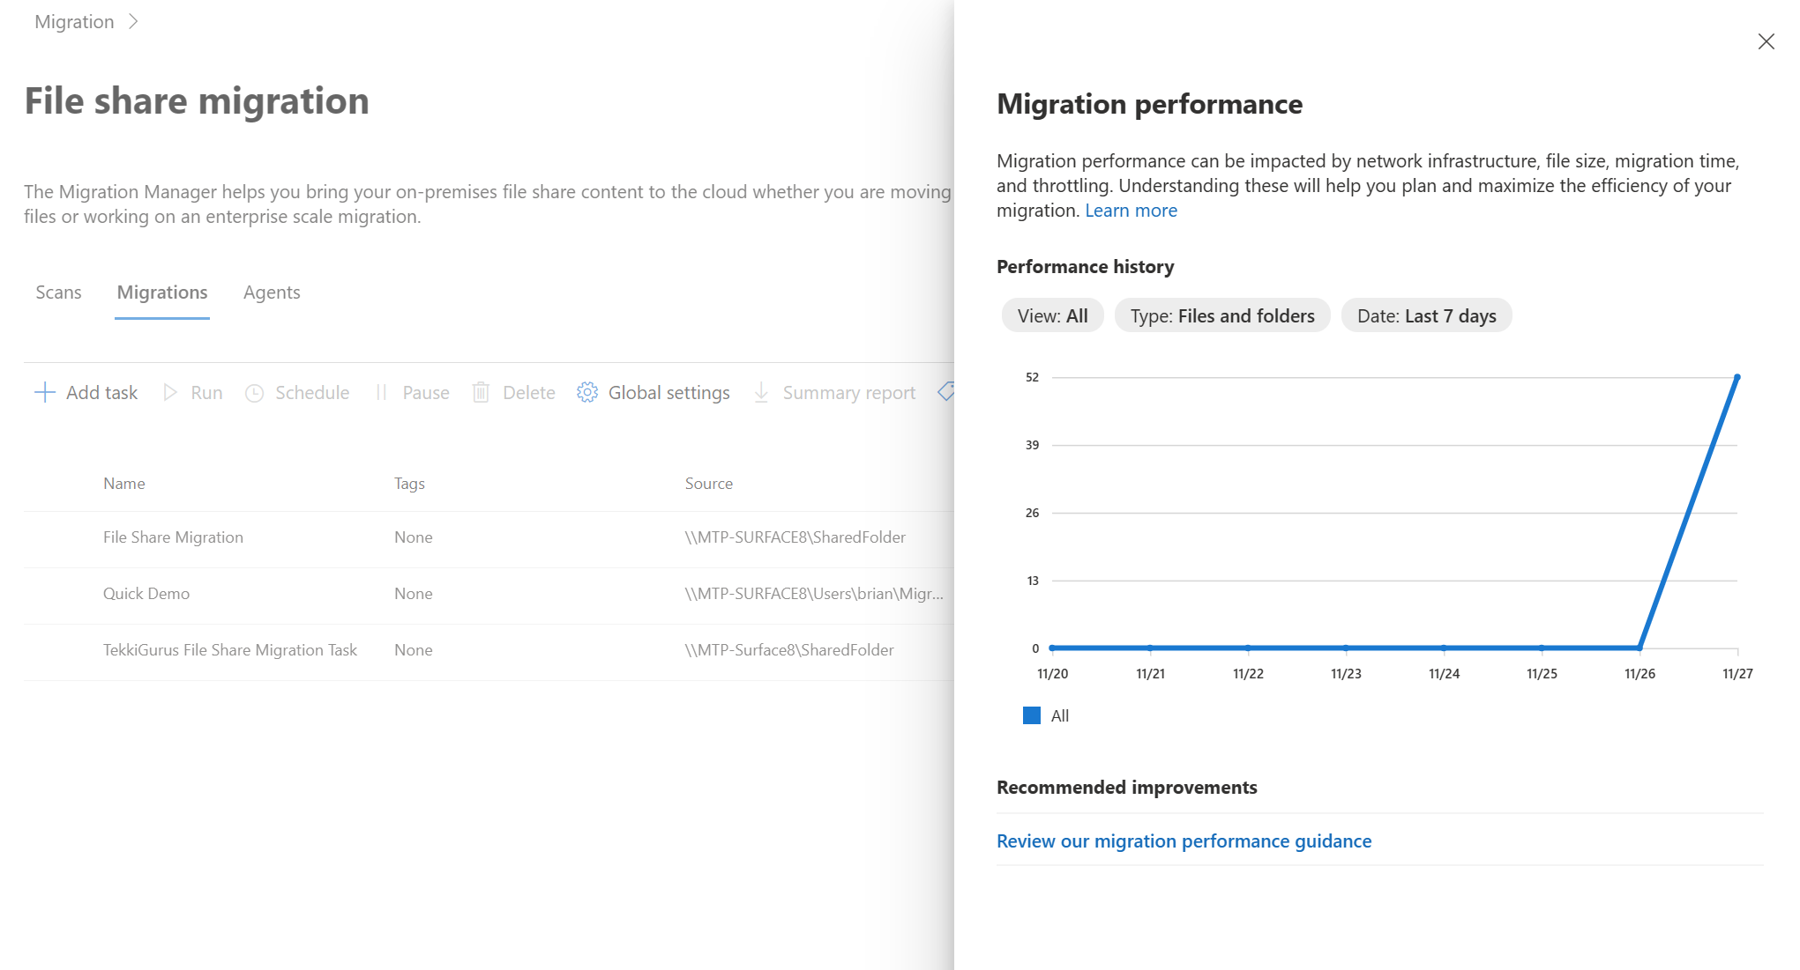 Screenshot of the default Migration performance graph showing all migrations, files and folders migrated over the last 7 days.